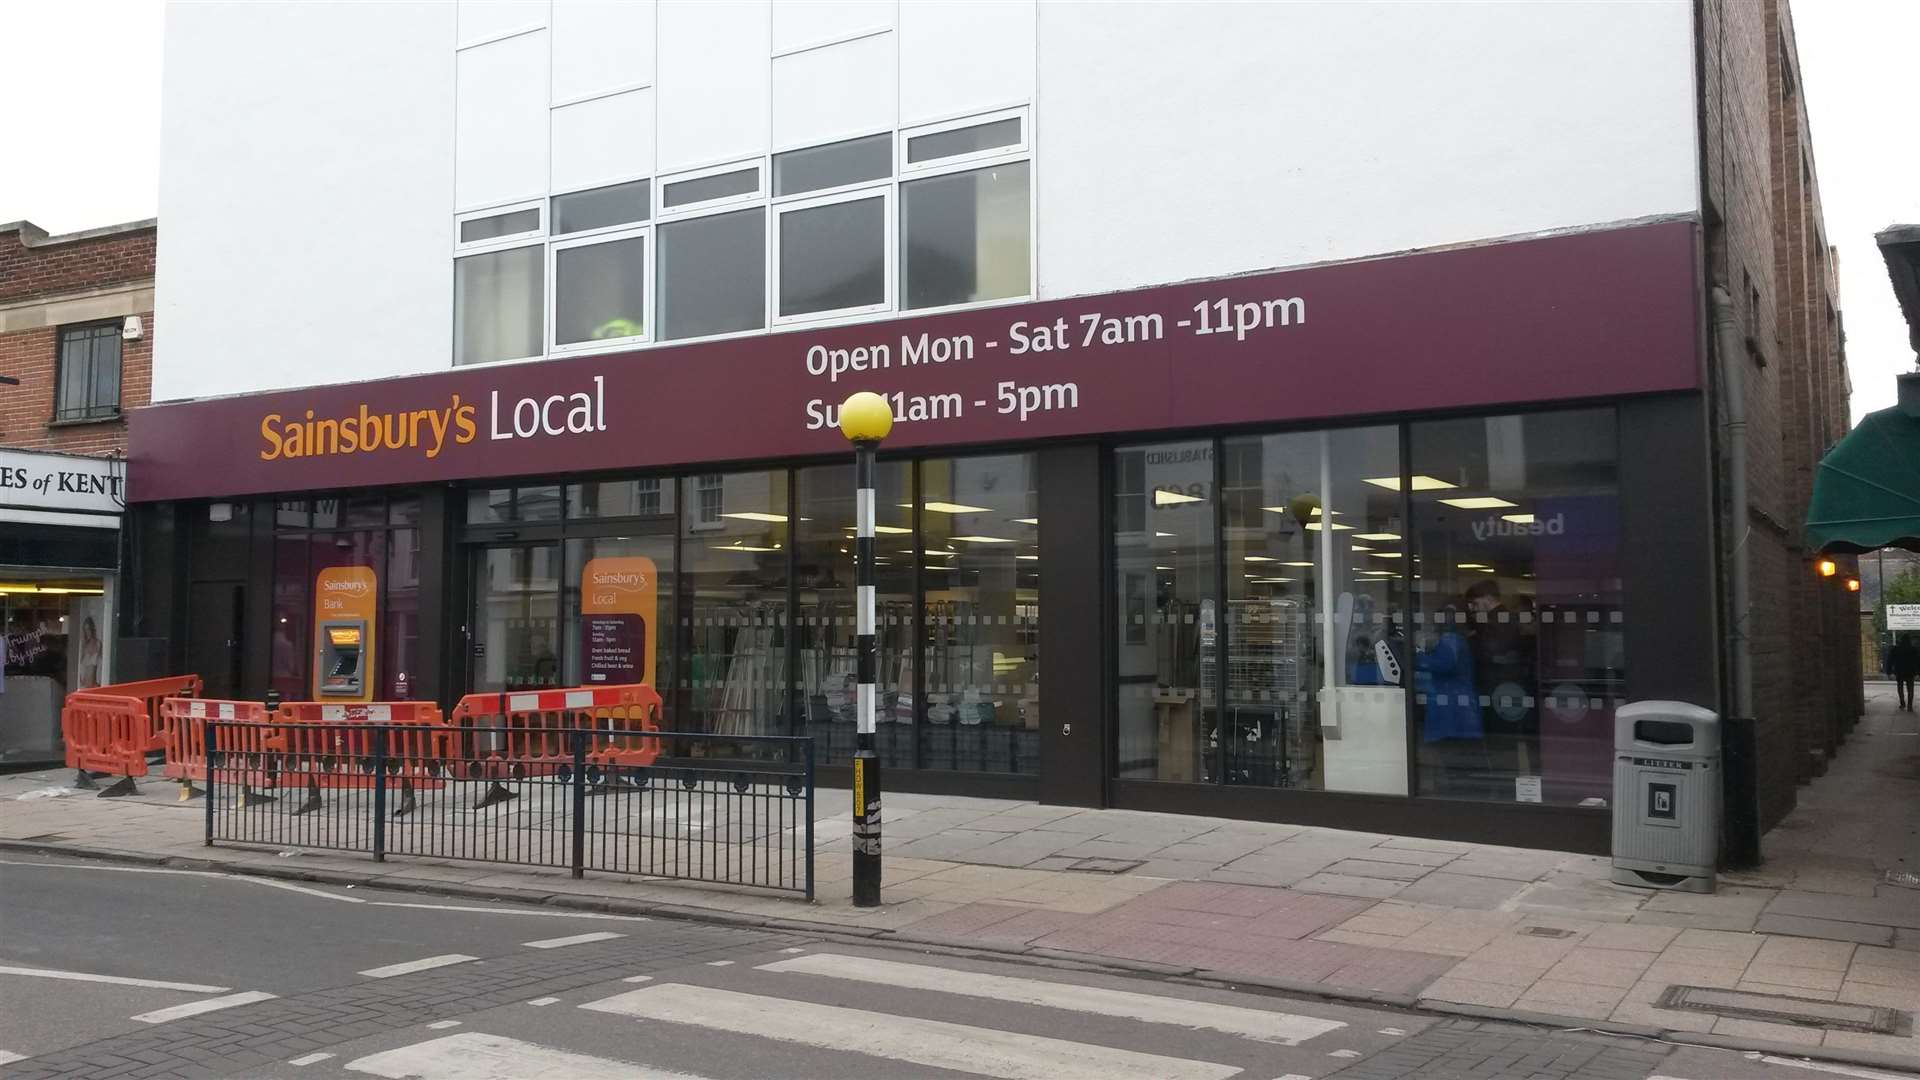 The Sainsbury's Local in the high street has been revamped